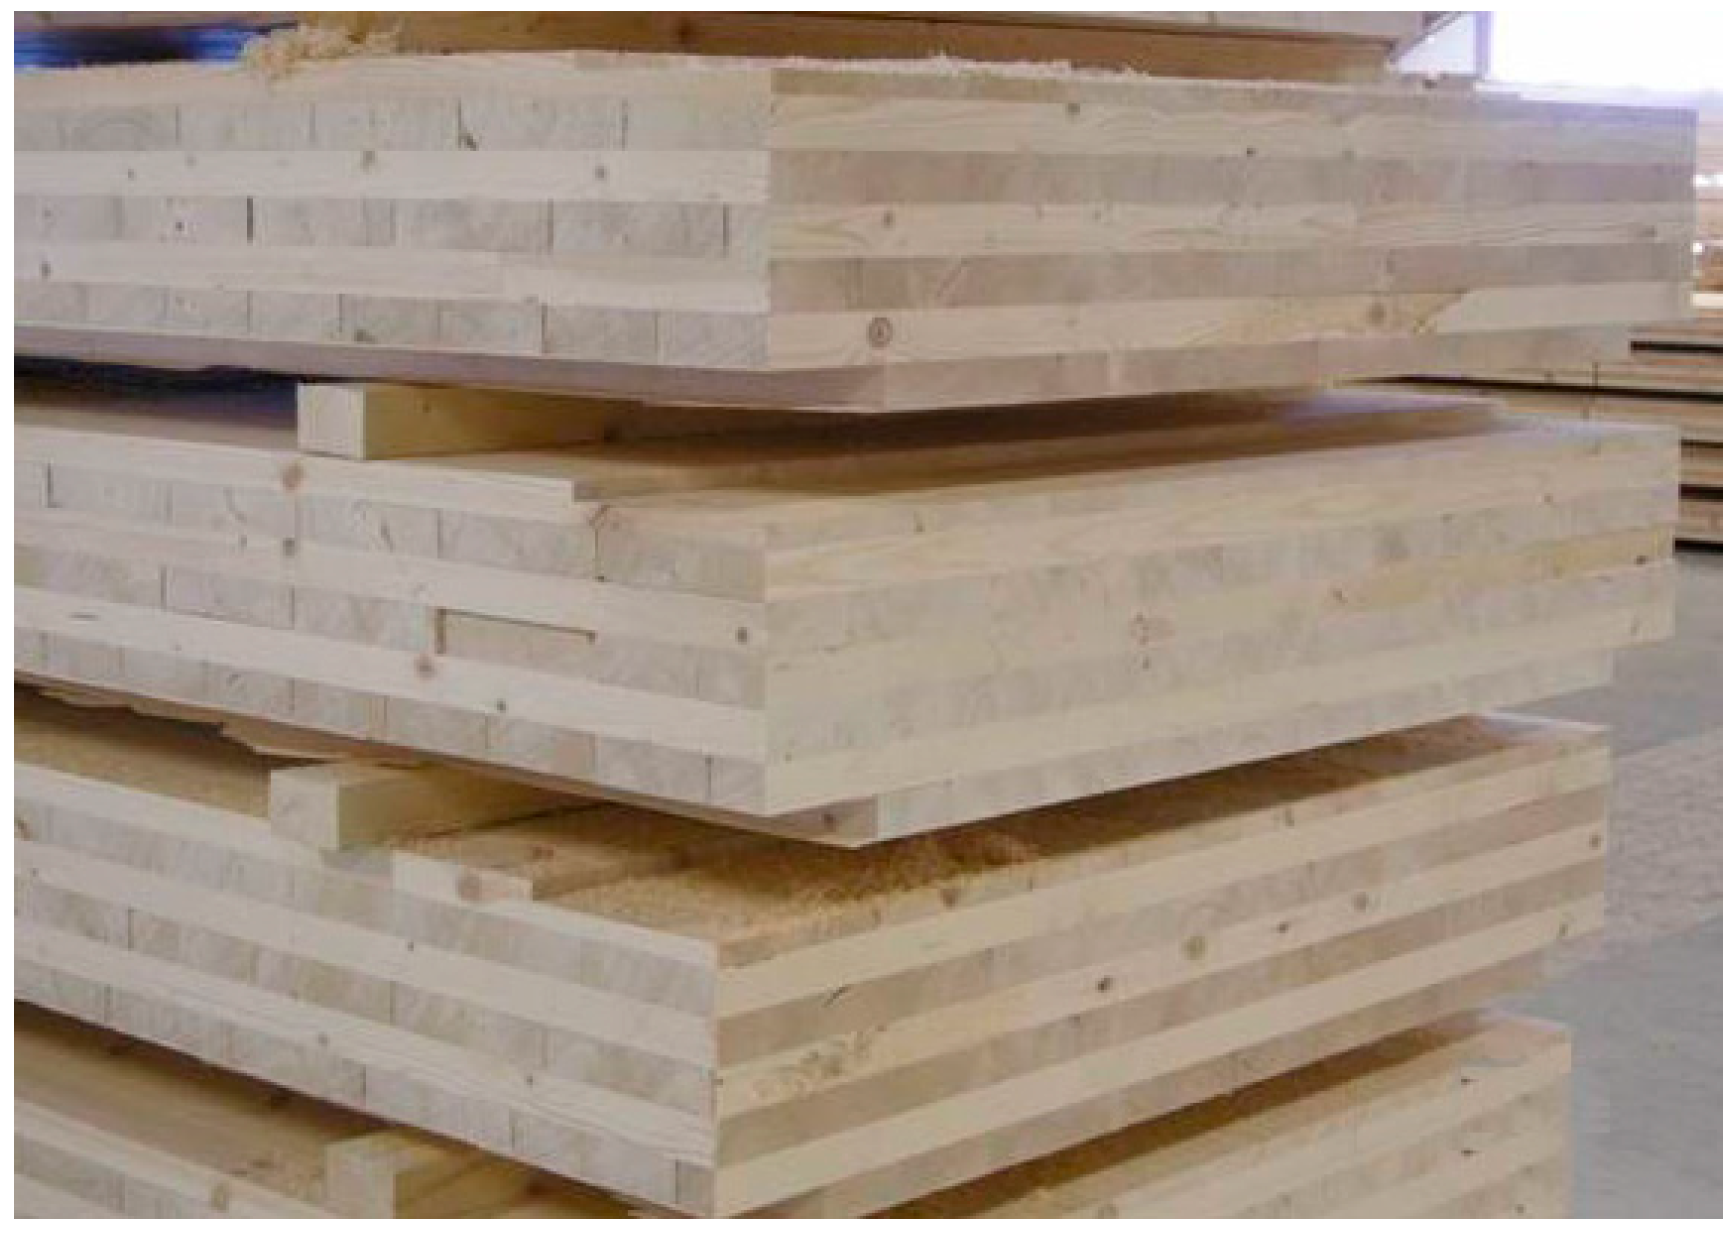 Sustainability | Free Full-Text | Assessing Cross Laminated Timber ...